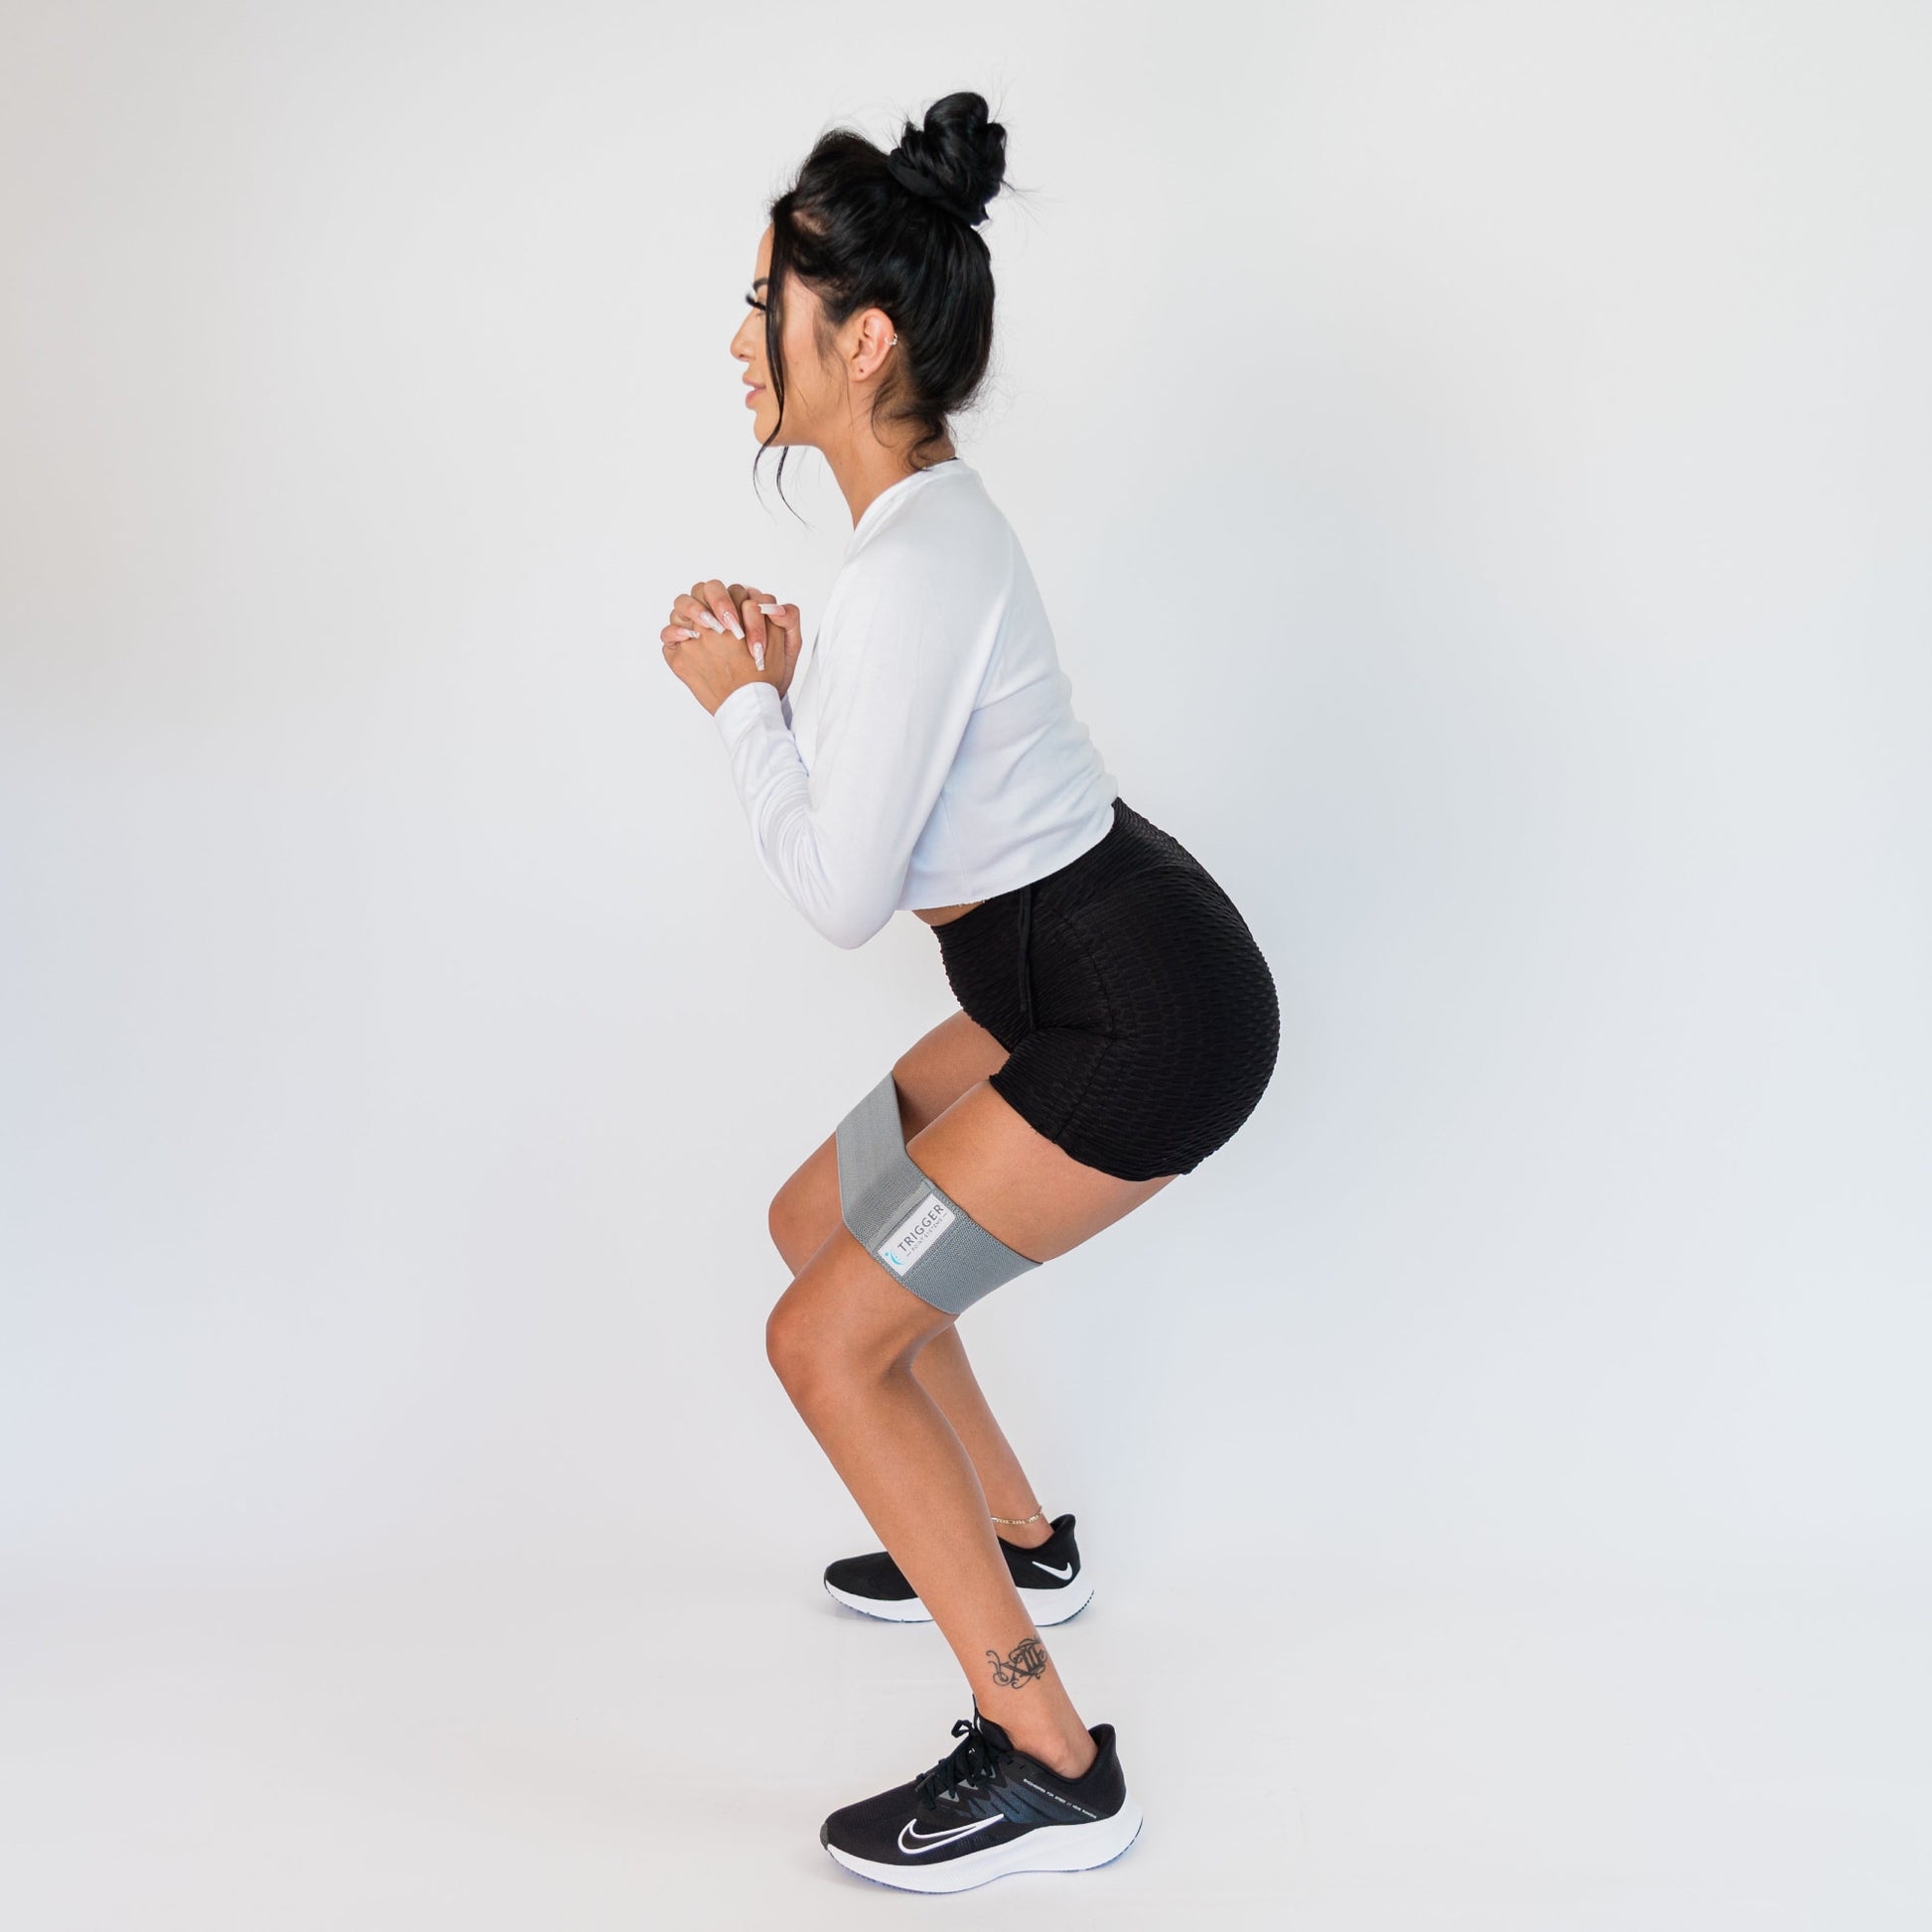 Woman squatting with the Dynamic Loop Bands